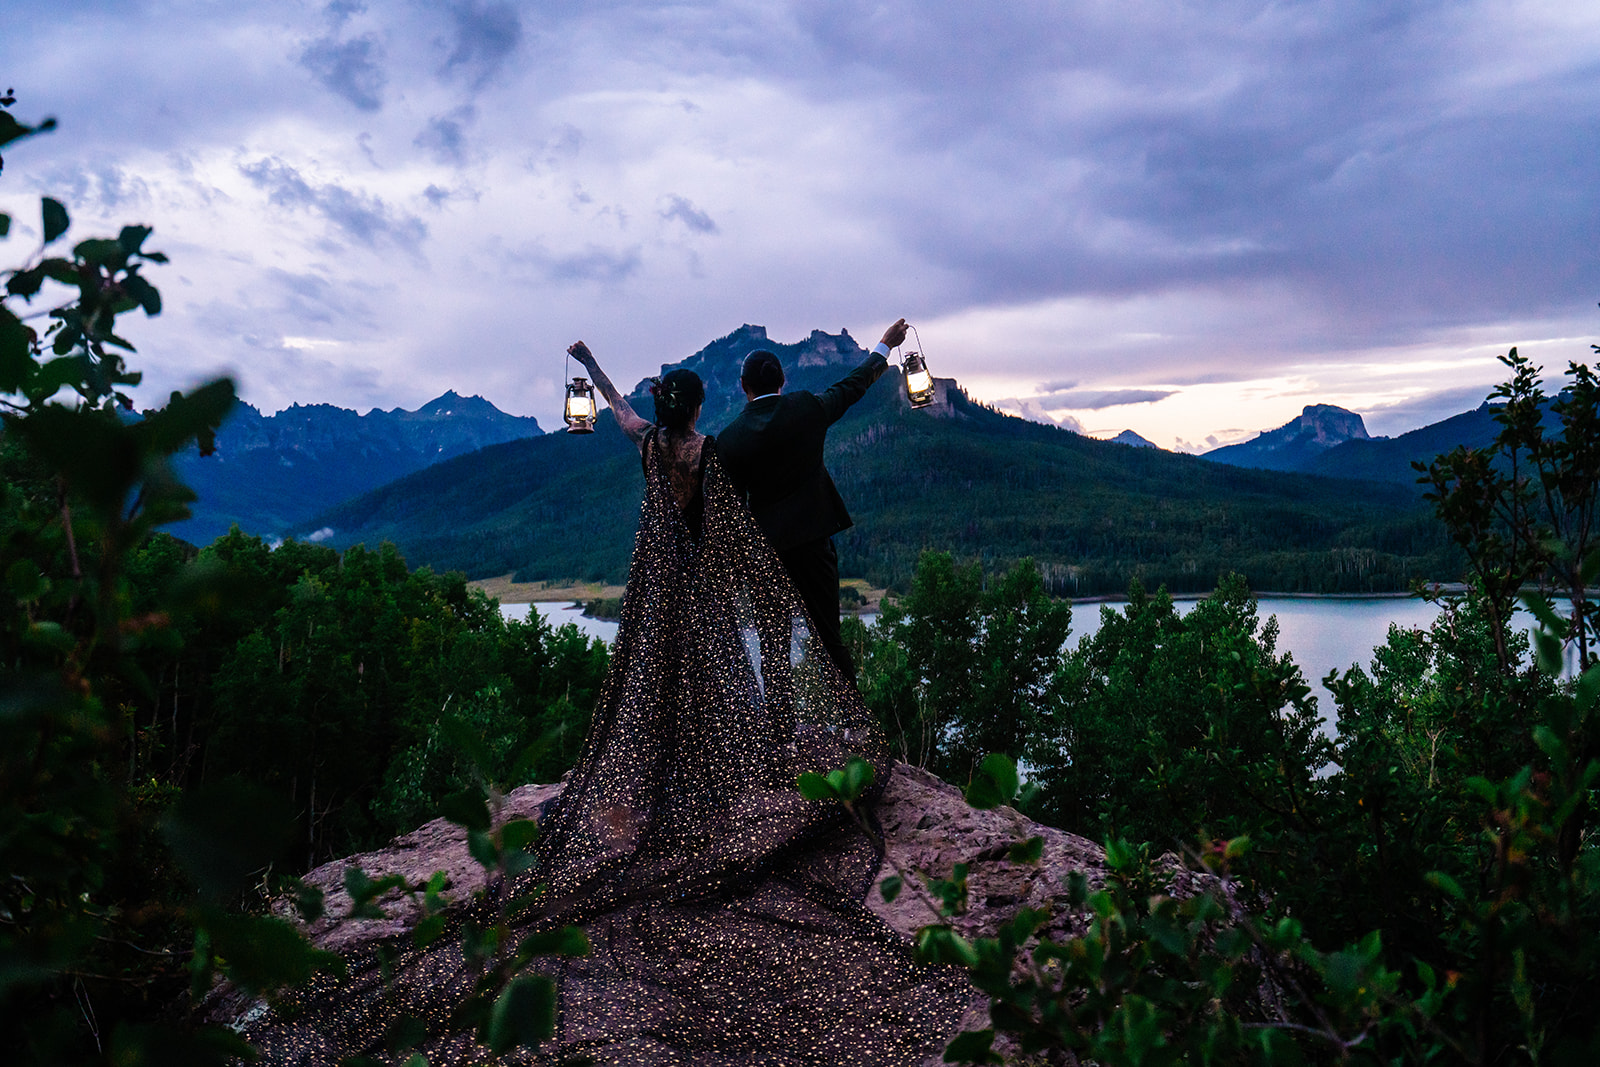 Celestial Themed elopement during a Full Moon